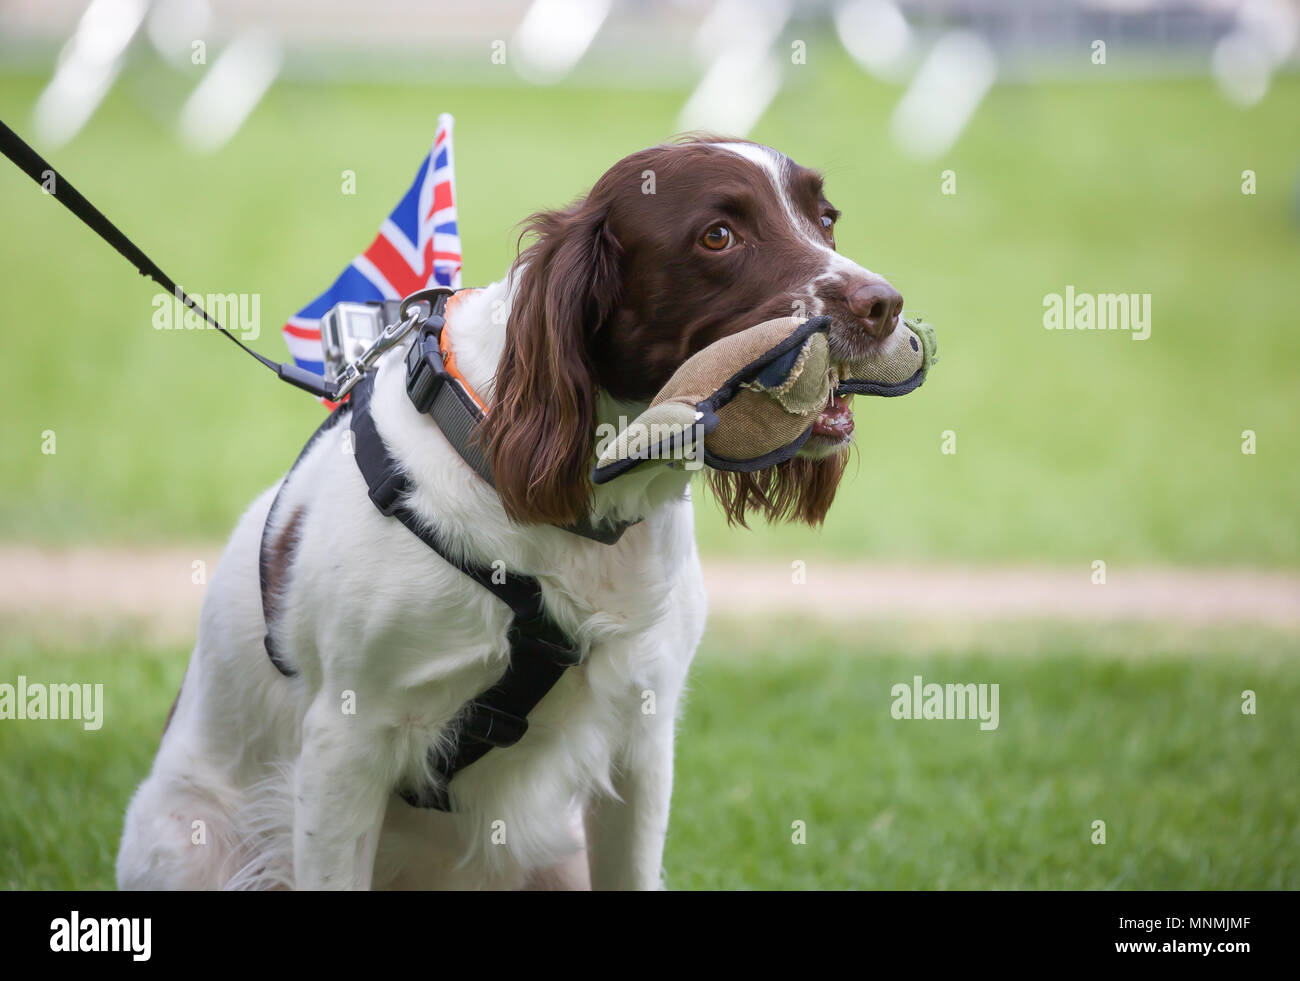 Windsor,UK,18th May 2018,A Cocker Spaniel joins in the celebrations with a Union Jack flag attached to its harness and a stuffed toy in its mouth as The Royal Wedding preparations get underway.Credit Keith Larby/Alamy Live News Stock Photo